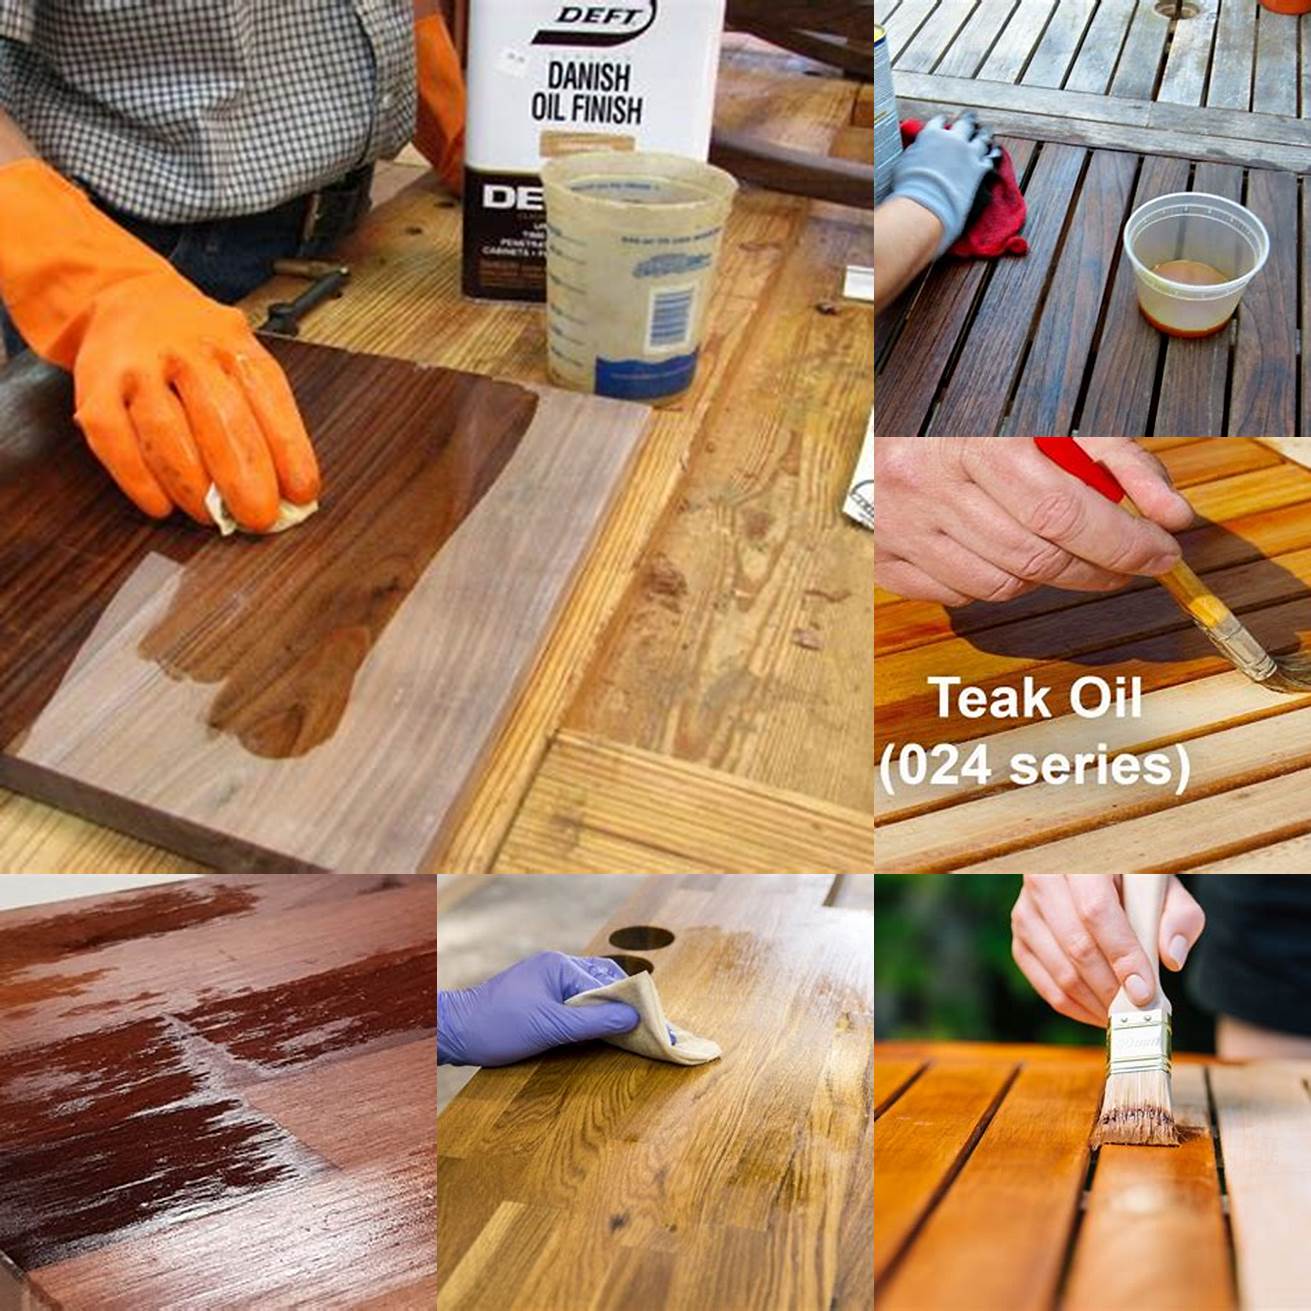 Apply a small amount of teak oil to the cloth and rub it into the wood